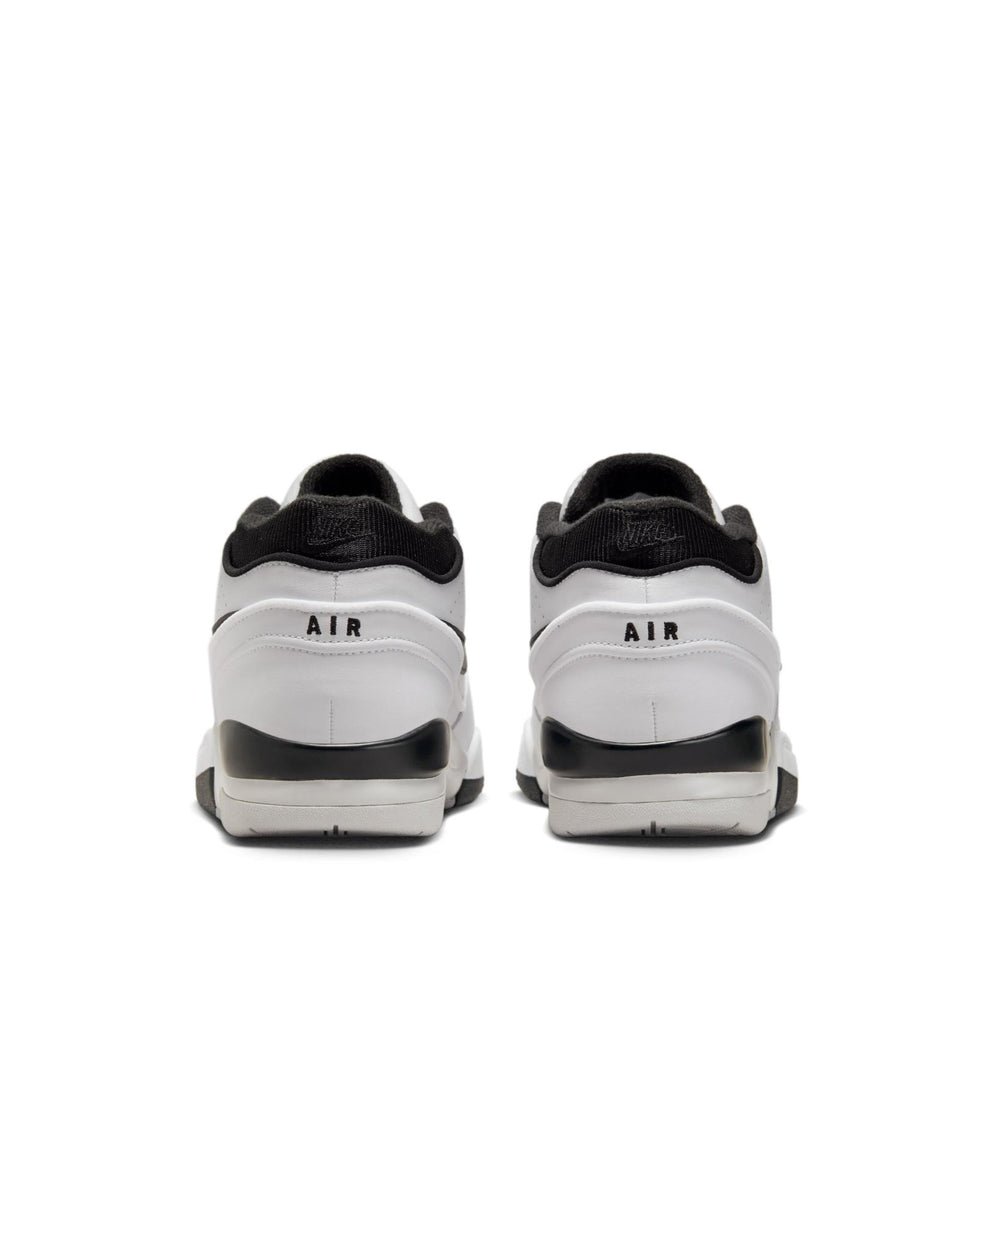 Nike Air Alpha Force 88: Billie Eilish x Nike Air Alpha Force 88 White  Black shoes: Where to get, release date, price, and more details explored